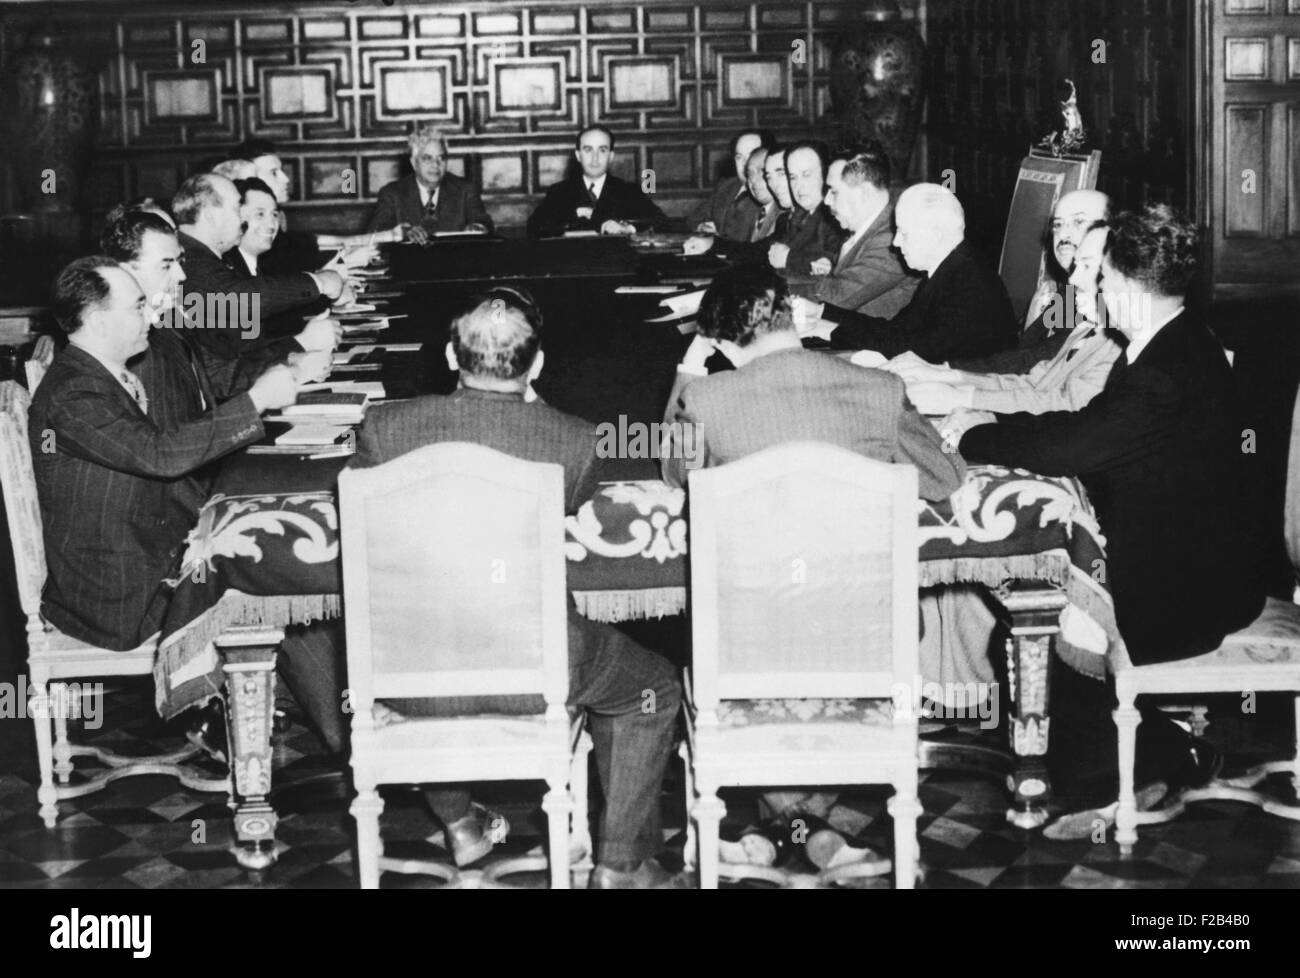 Mexican President Cardenas (5th man, on right side) meeting with a special session of his cabinet. June 20, 1942. They discussed a U.S plan to protect the continent from possible Nazi and Fascist invasion and general military service for men between 18 and 35. - (CSU 2015 5 13) Stock Photo